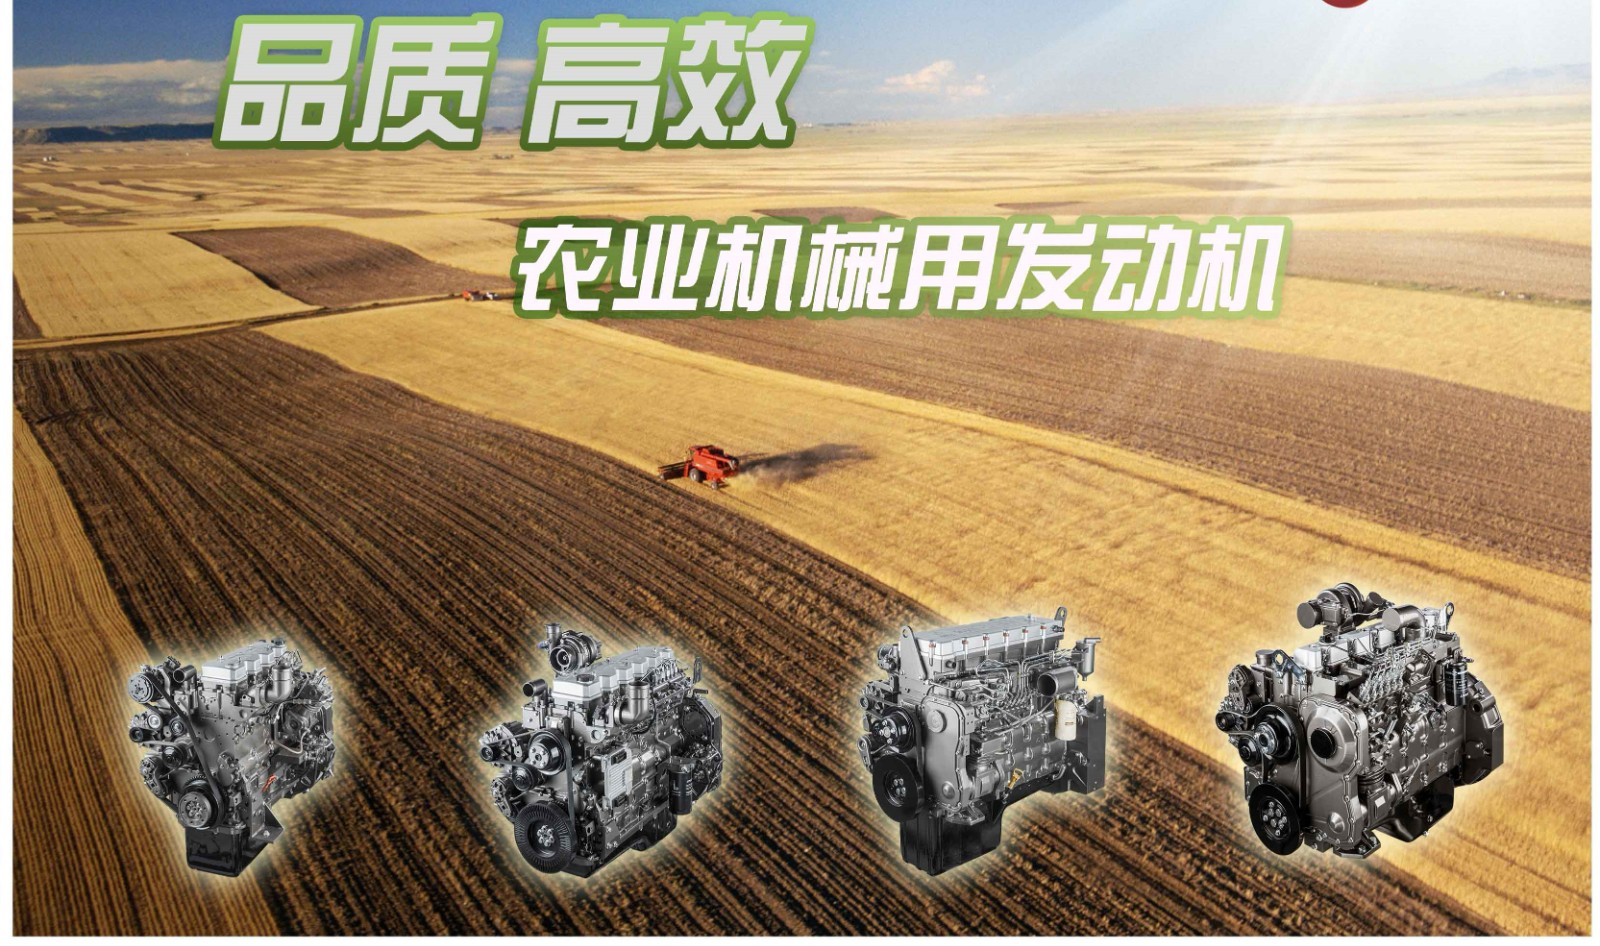 Agriculture engine, tractor engine